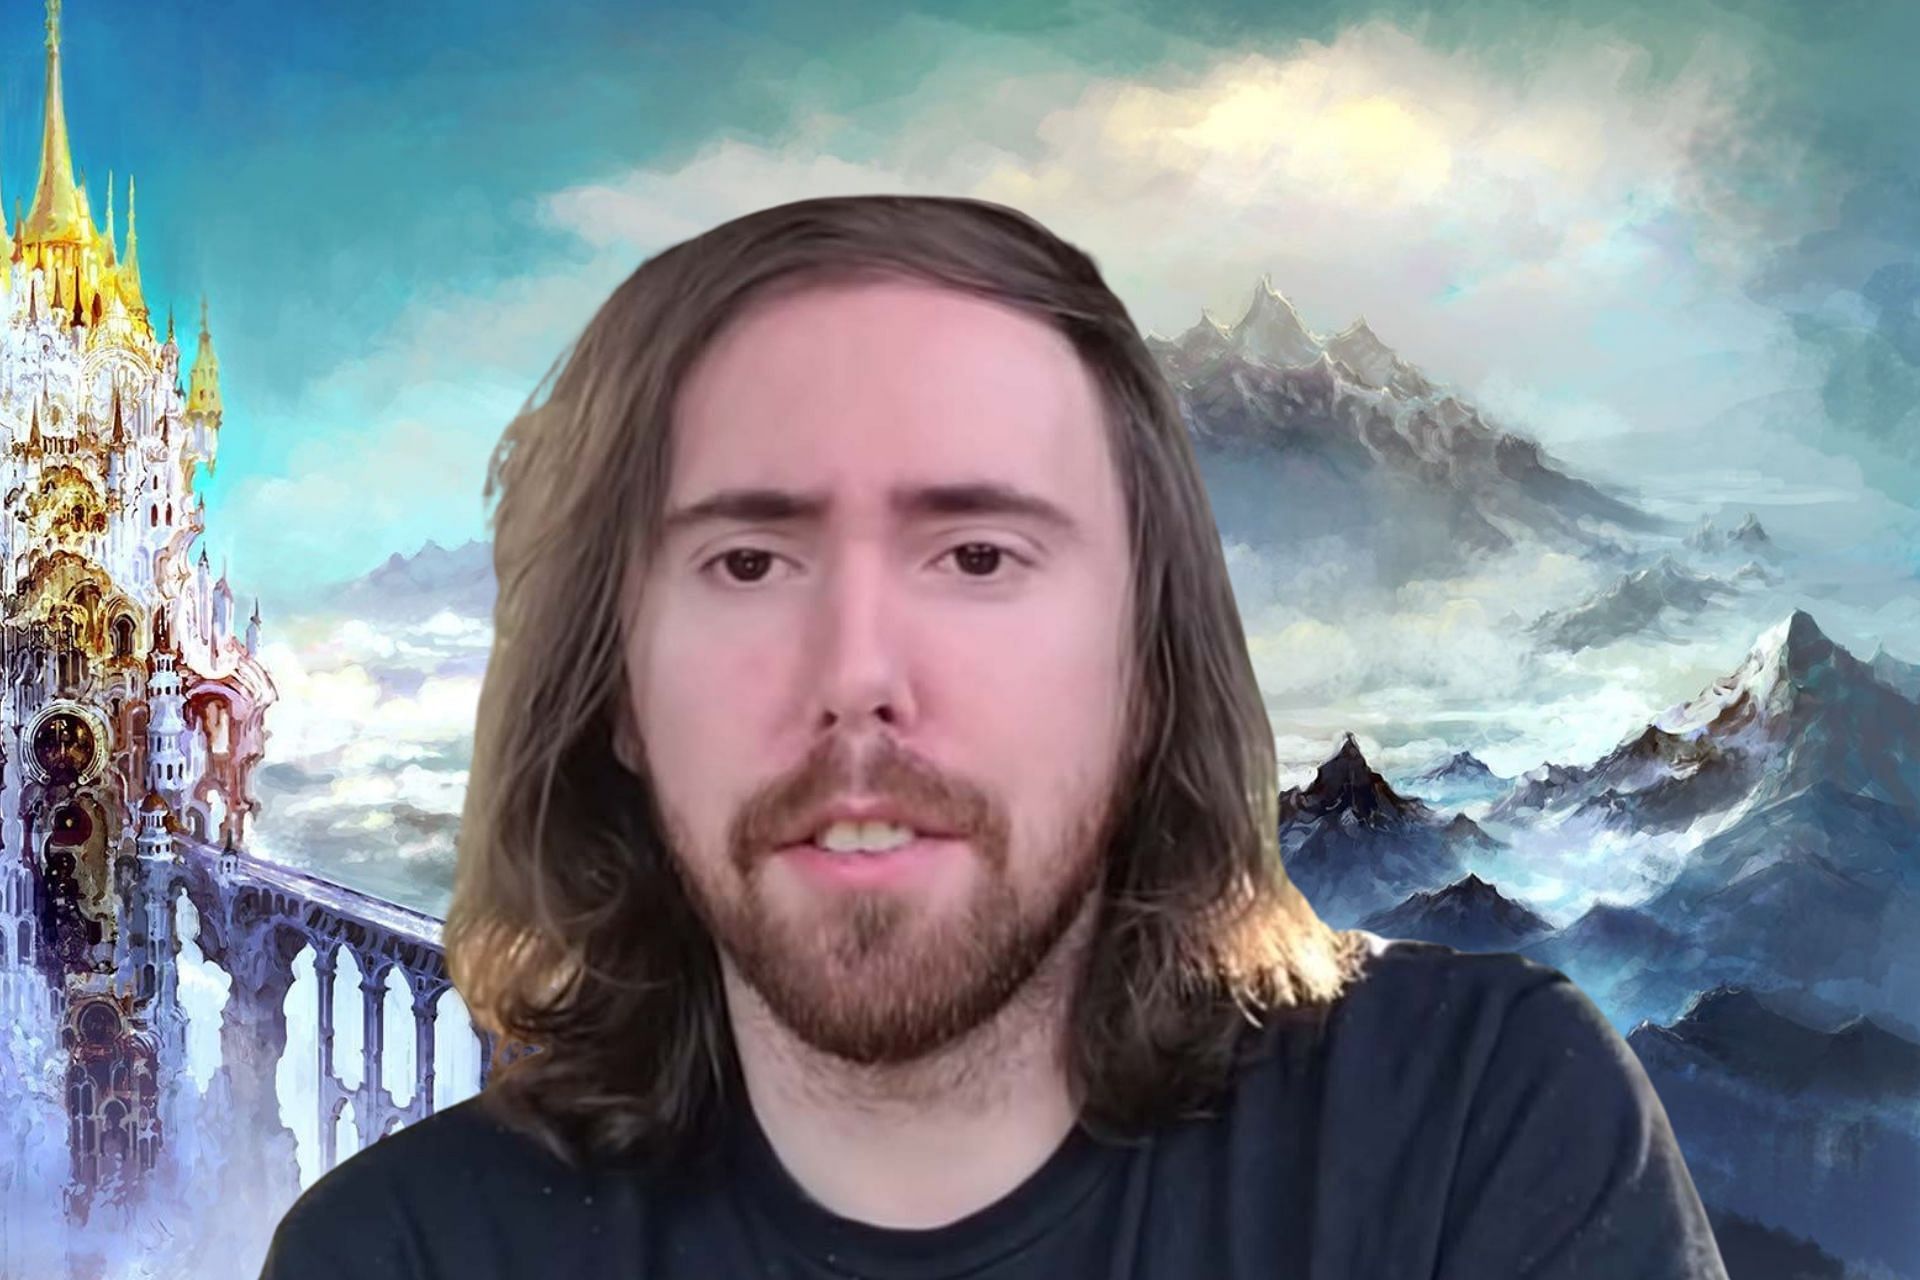 Asmongold will begin playing Final Fantasy XIV later this month (Image via Sportskeeda)